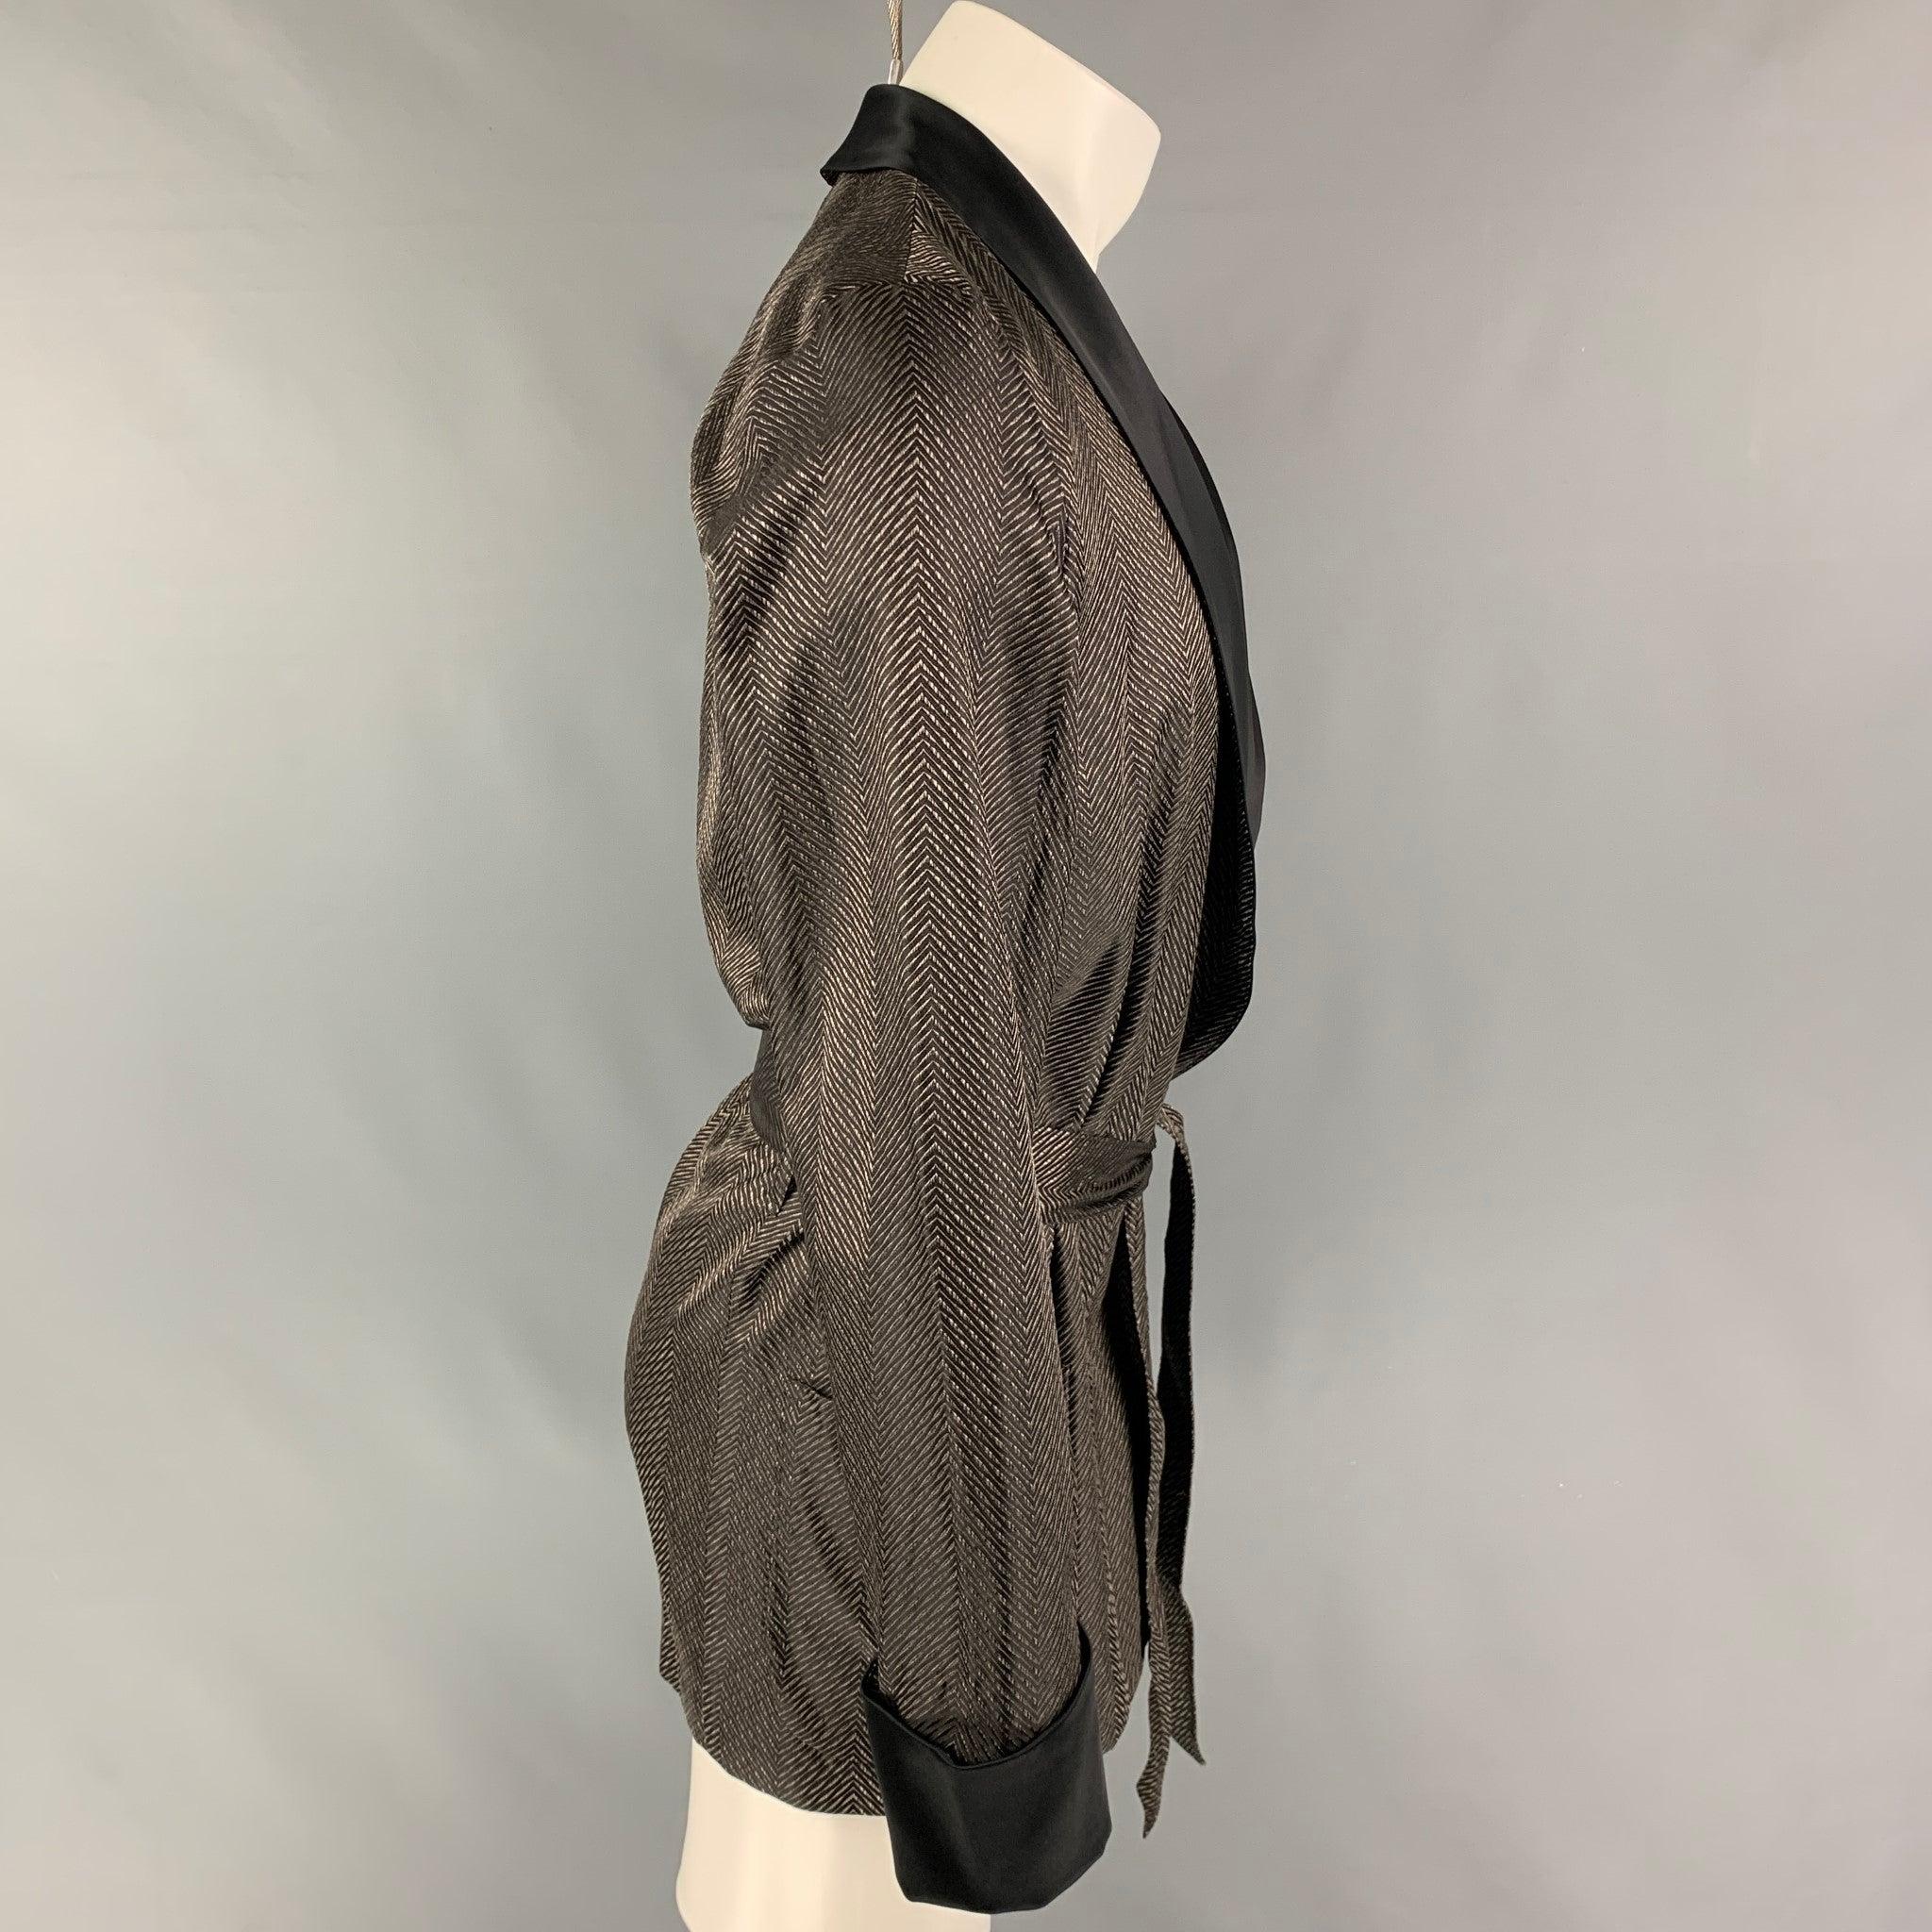 LA PERLA smoking jacket comes in a black & brown jacquard silk featuring a shawl collar, patch pockets, belted, and a open front. Made in Italy.
Very Good
Pre-Owned Condition. Fabric tag removed.  

Marked:   Size tag removed.  

Measurements: 
